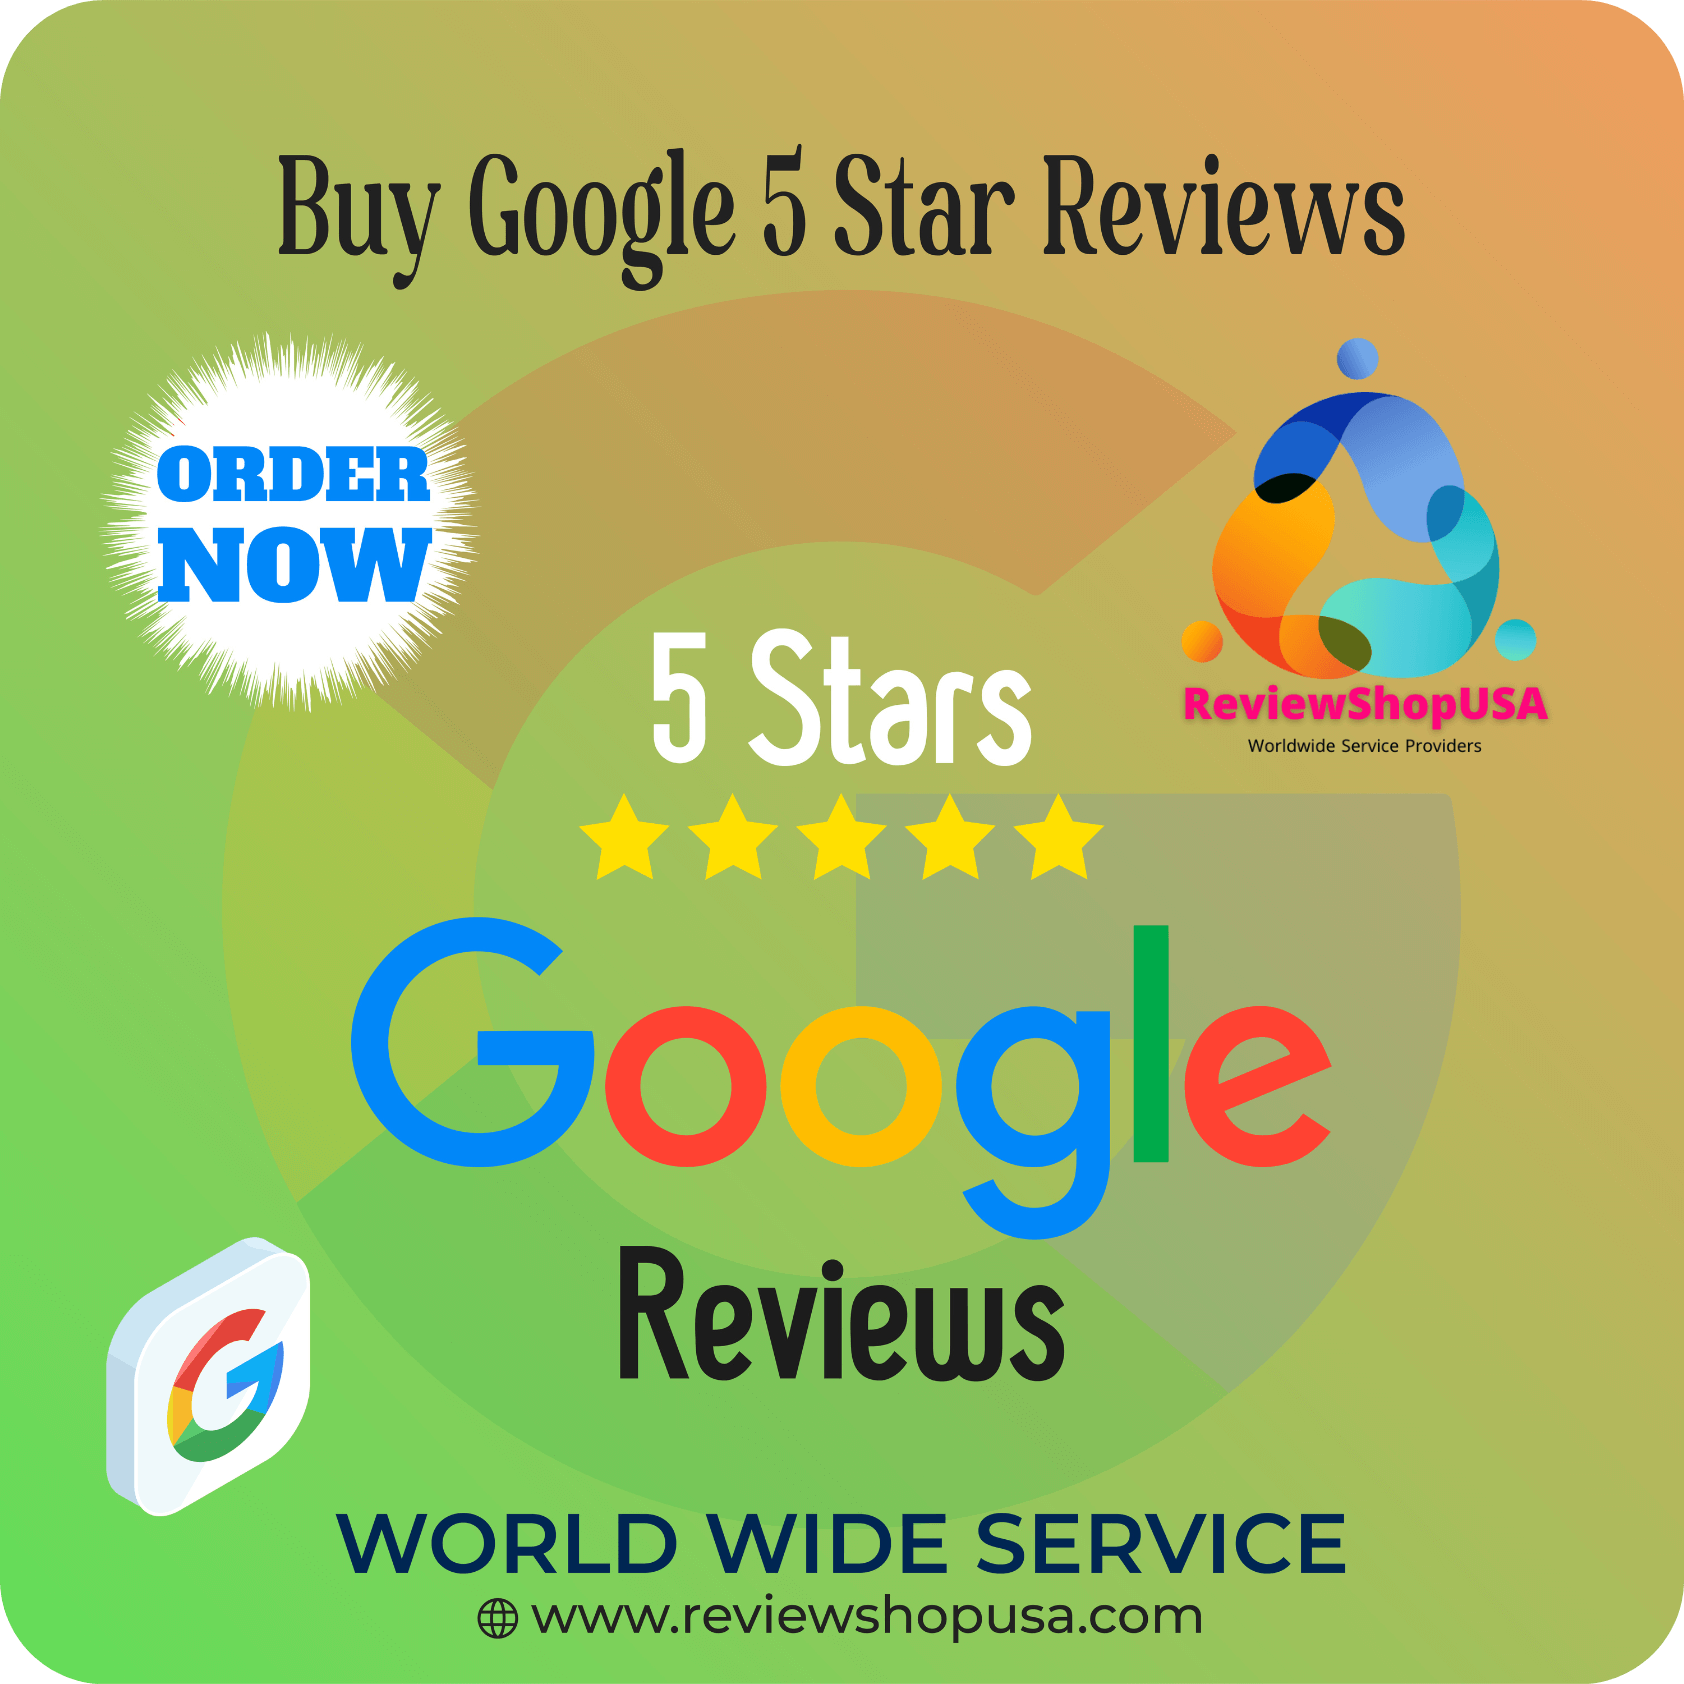 Buy Google Reviews - Buy 5 Star Reviews for Your Business..